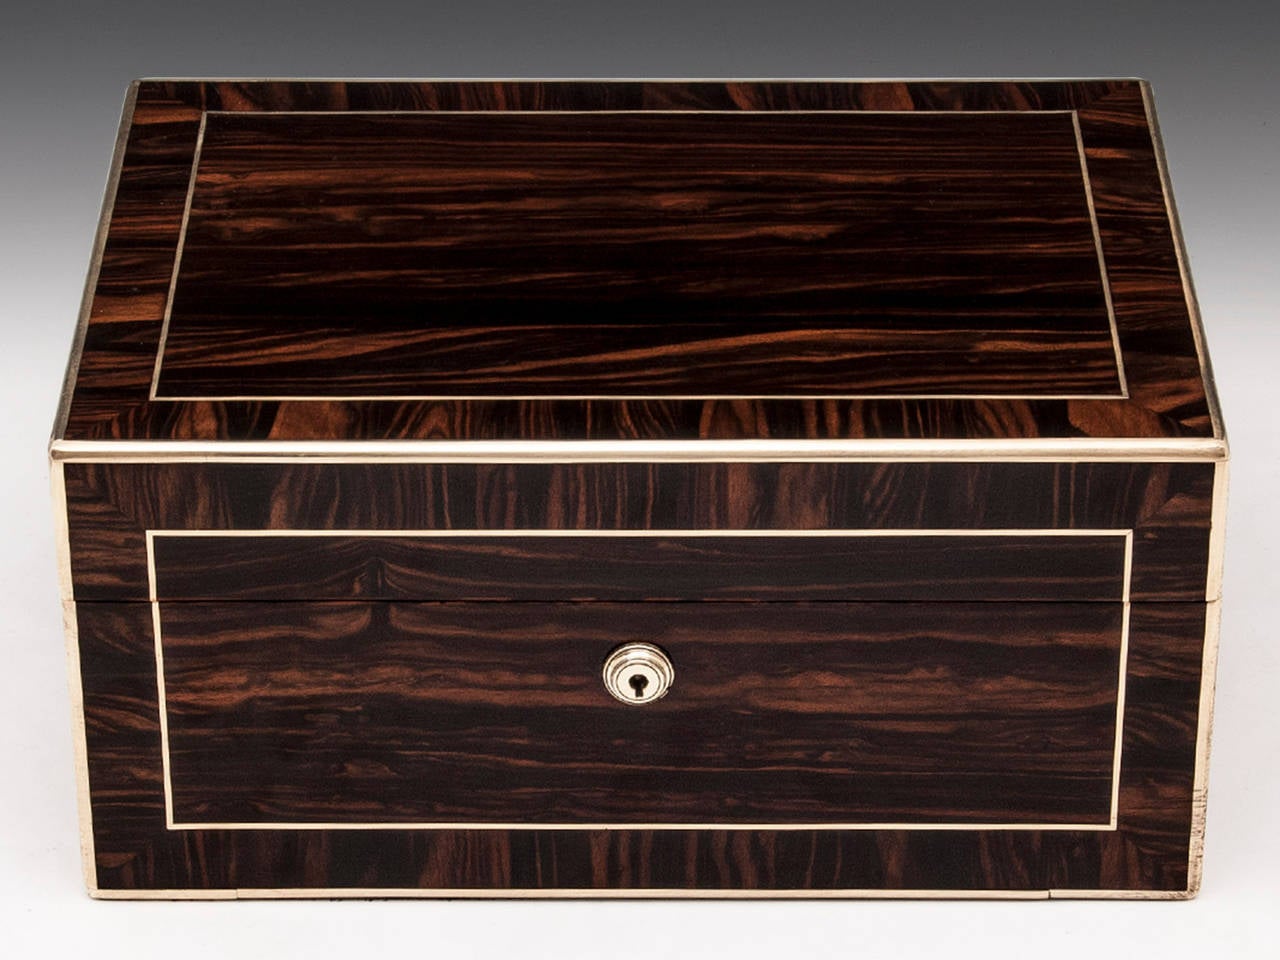 Coromandel Jewellery Box by one of London's top cabinet makers 